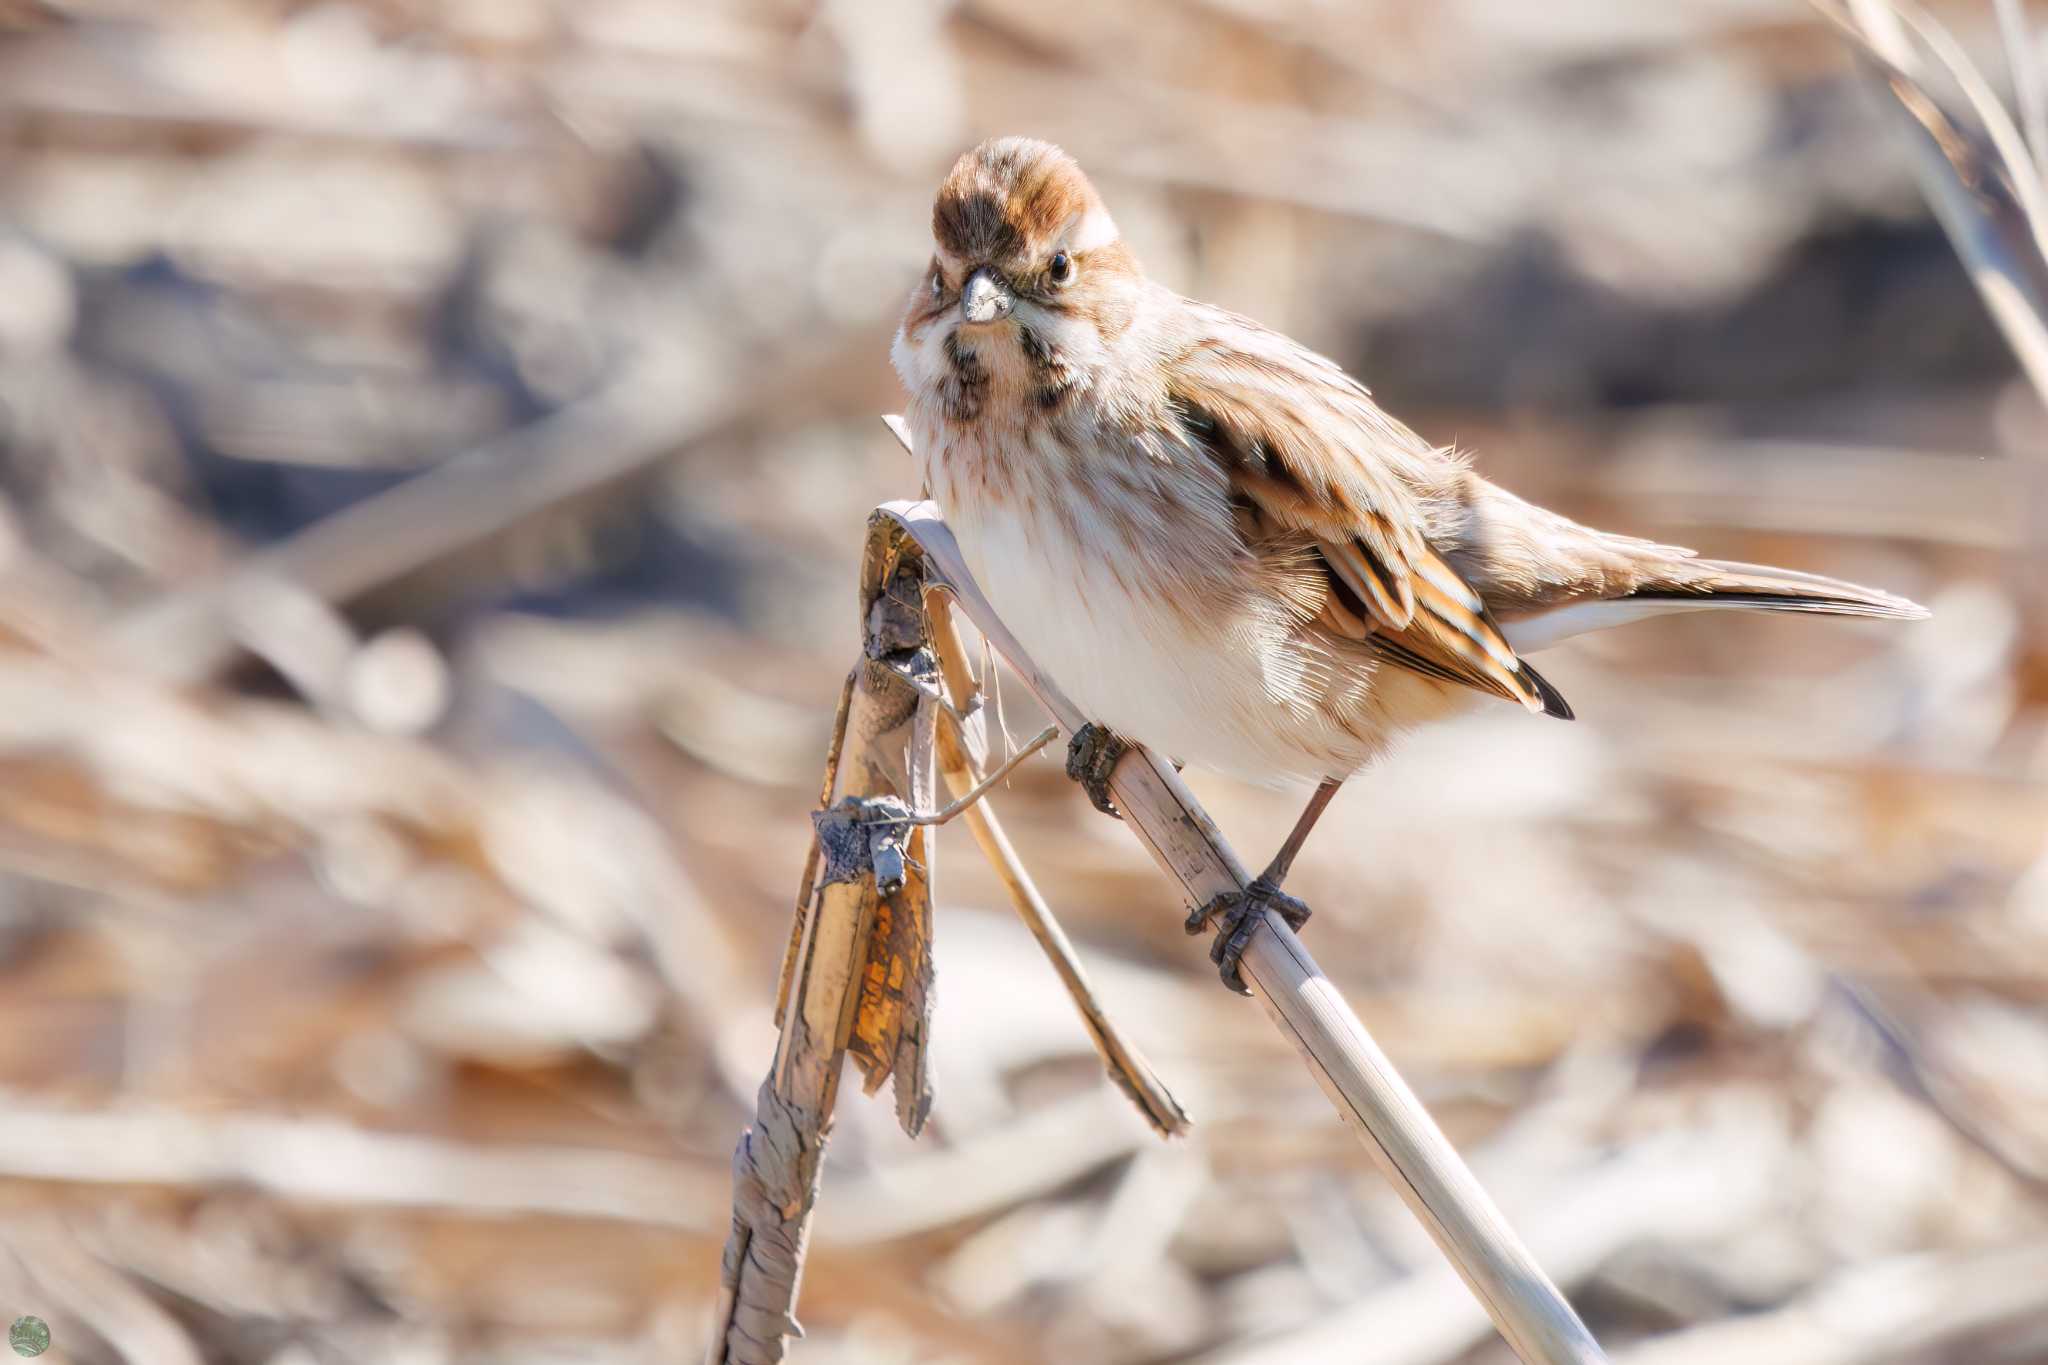 Photo of Common Reed Bunting at Watarase Yusuichi (Wetland) by d3_plus